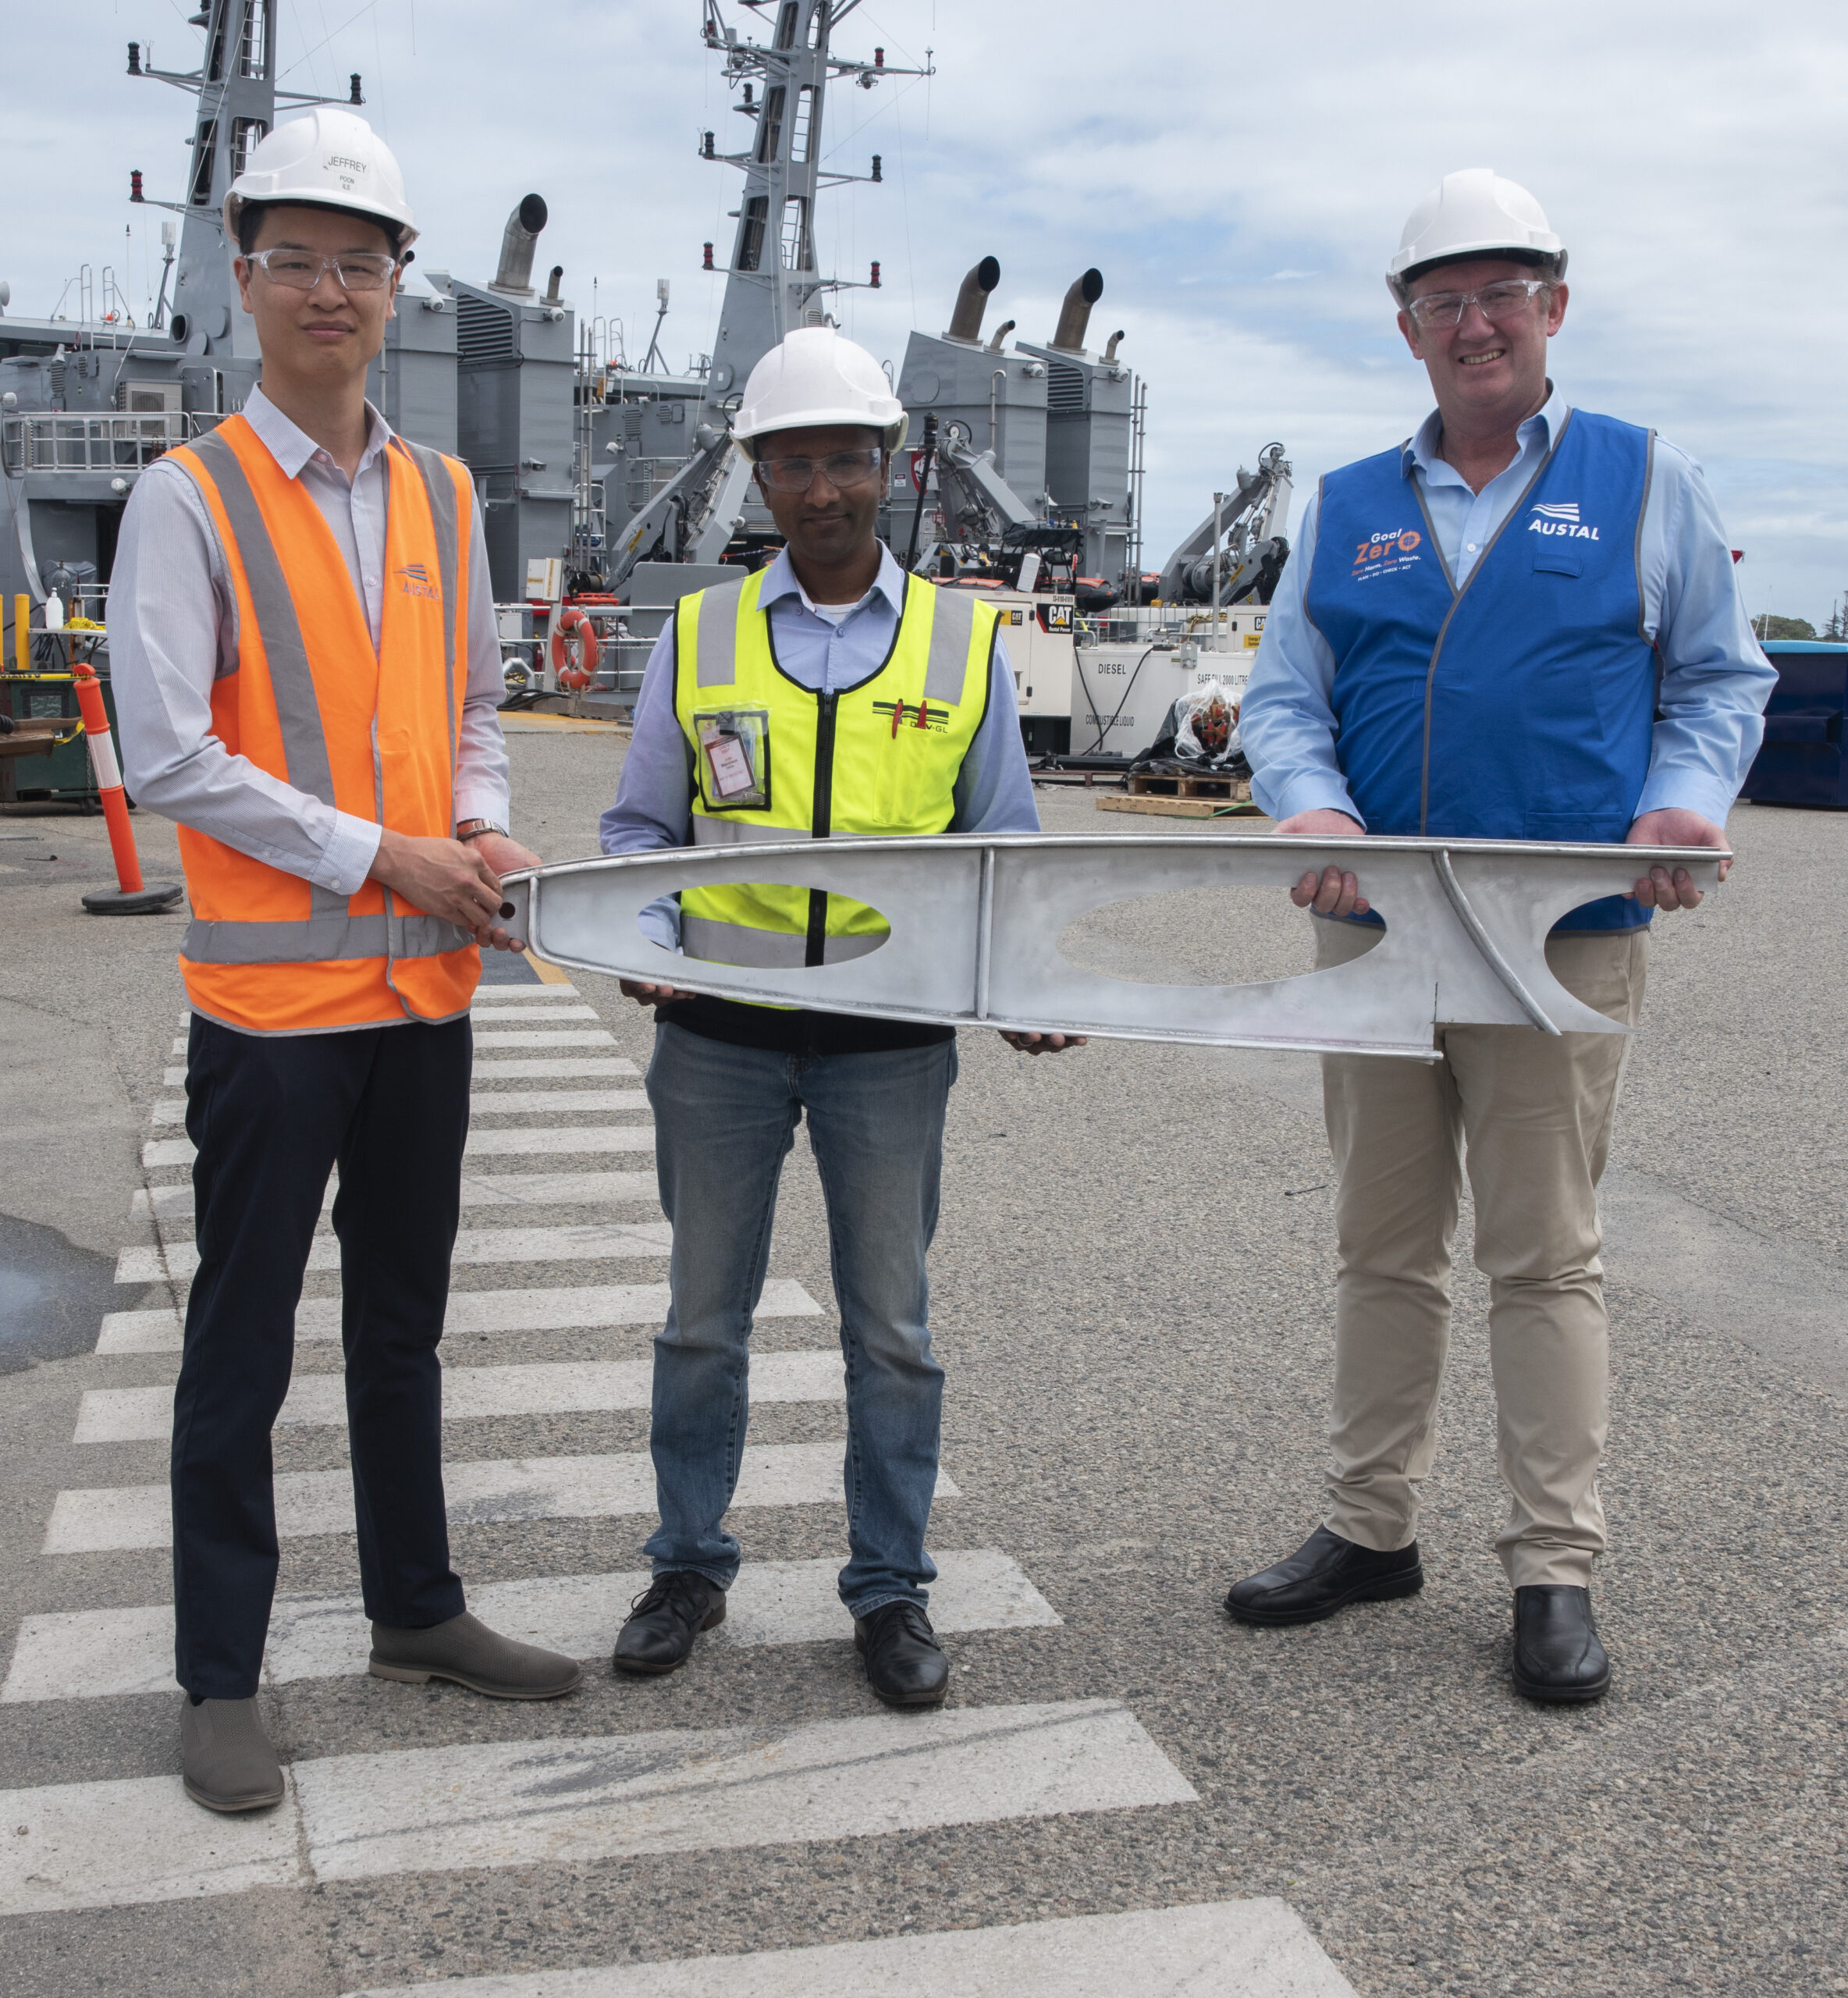 From Left: Austal Technology Project Manager Jeffrey Poon, DNV Representative Jude Stanislaus, AML3D Chief Technology Officer Andy Sales with a sample of the davit produced during the additive manufacturing project. (image: Austal Australia)